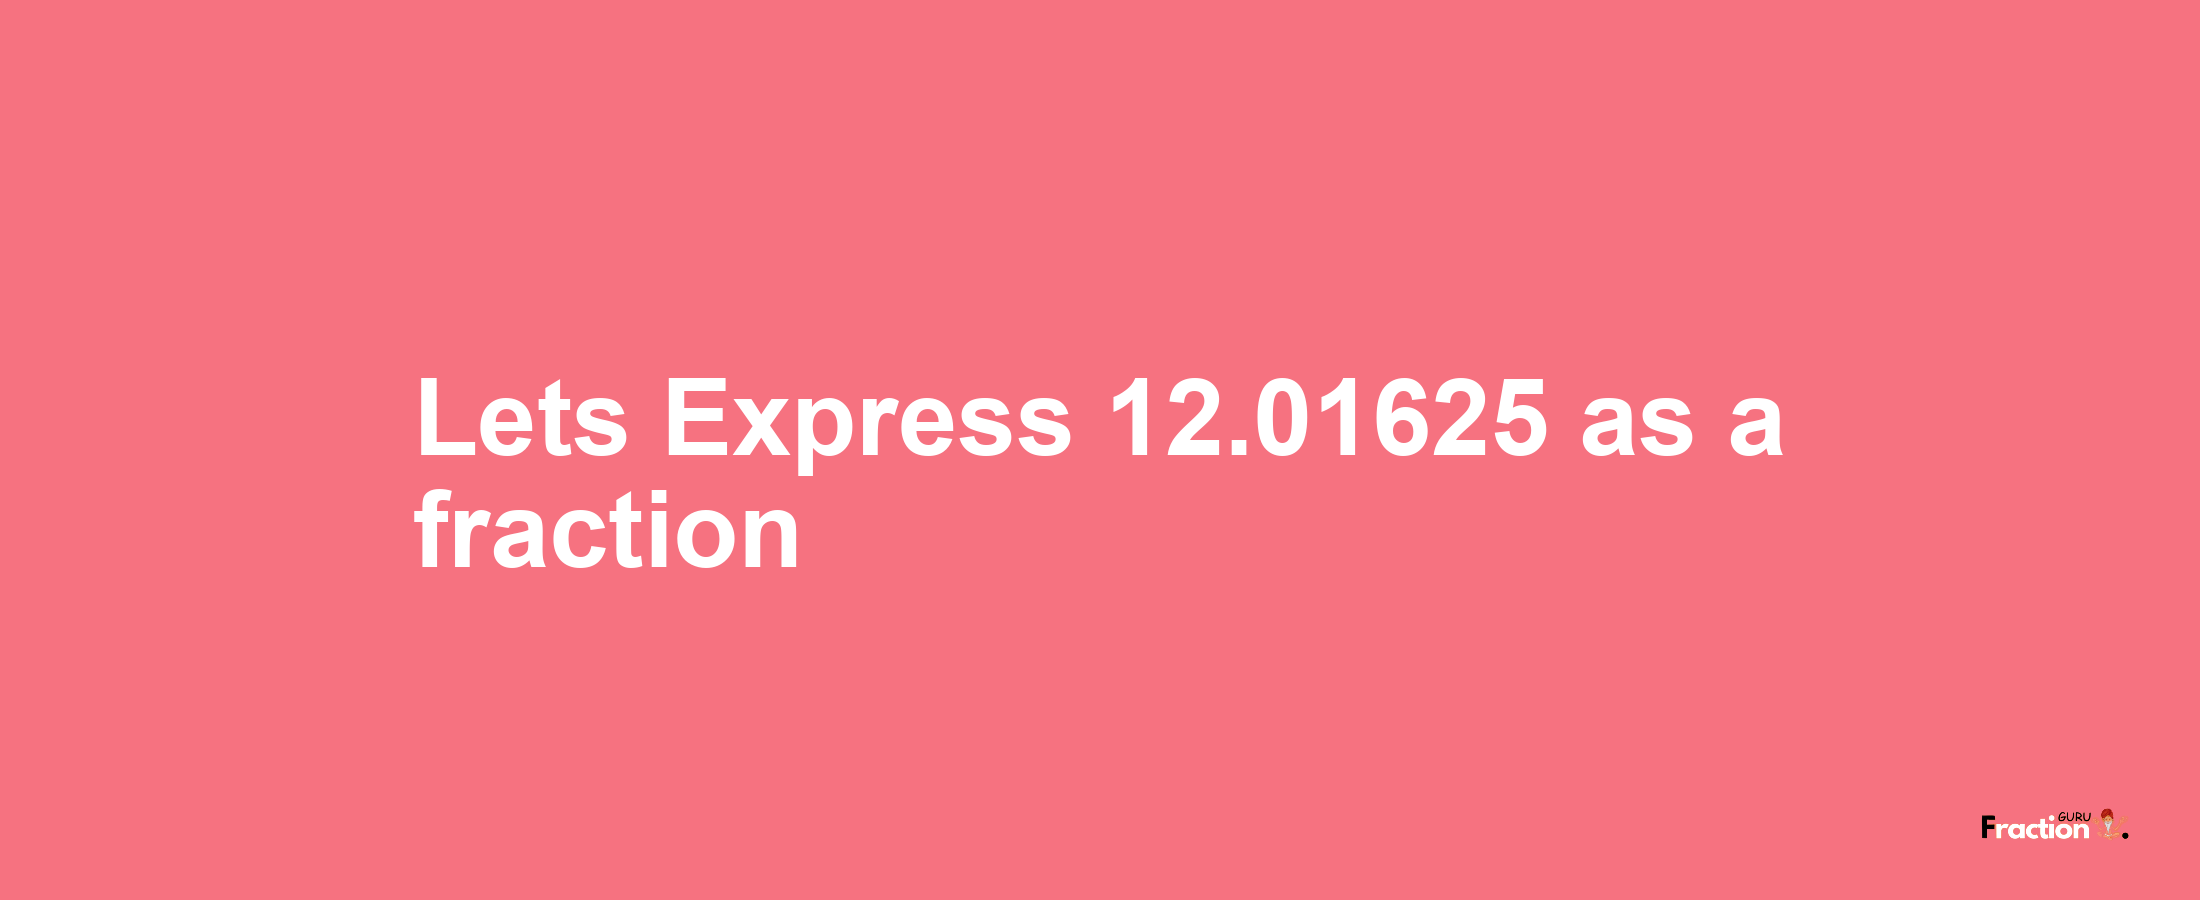 Lets Express 12.01625 as afraction